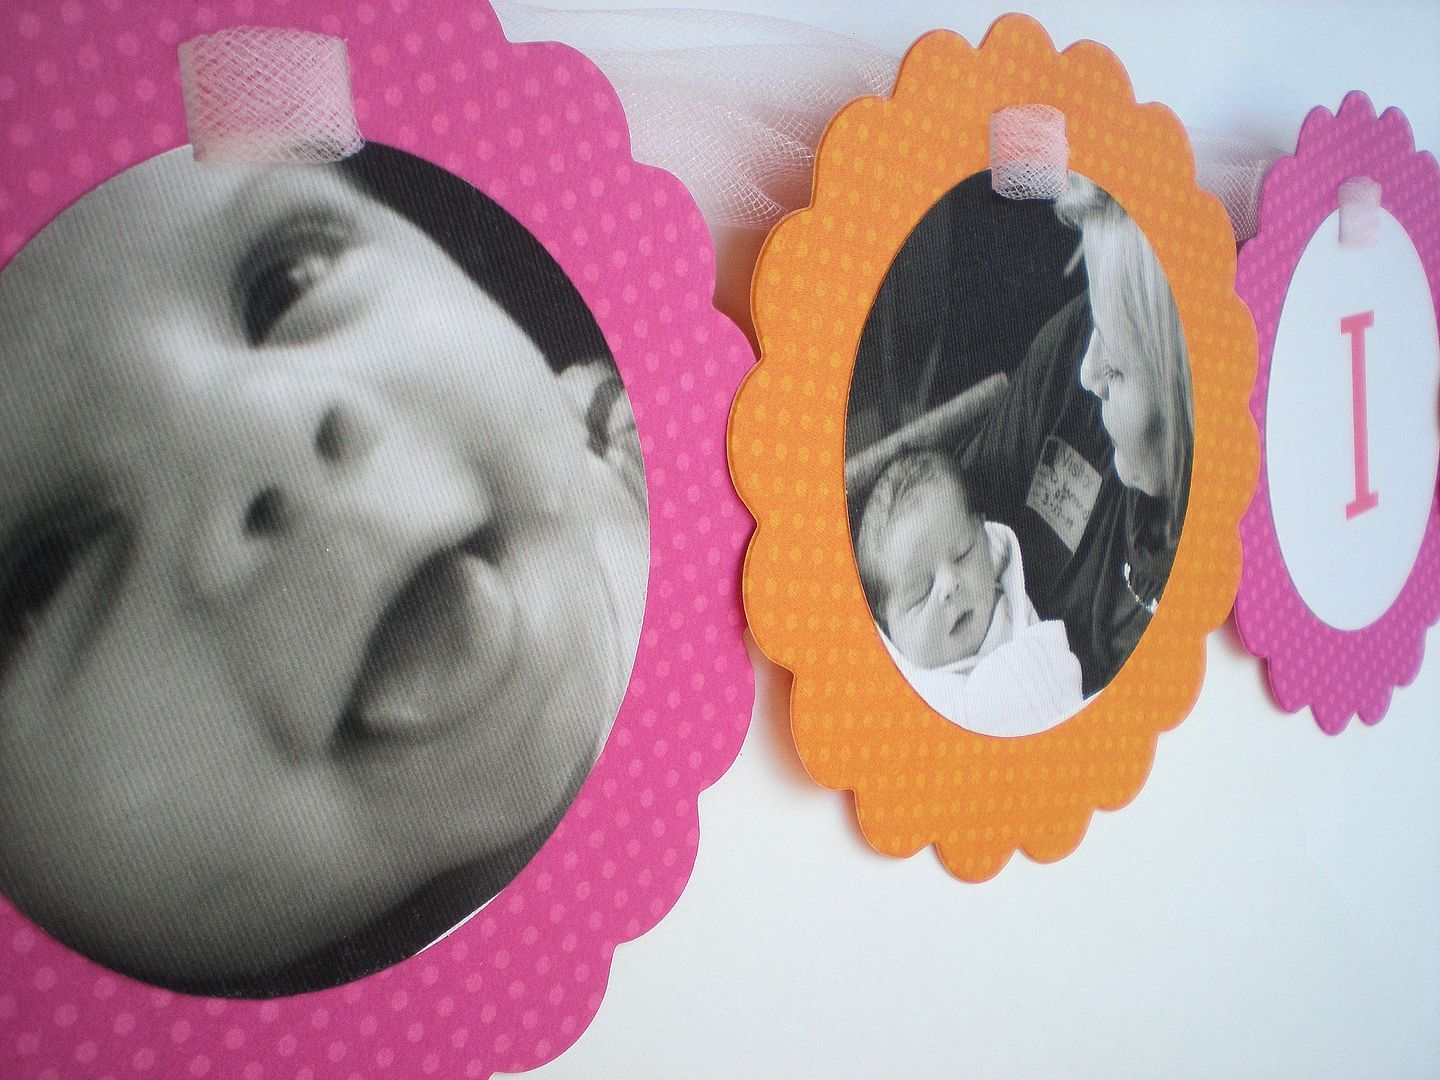 Handmade photo garland - perfect party banner